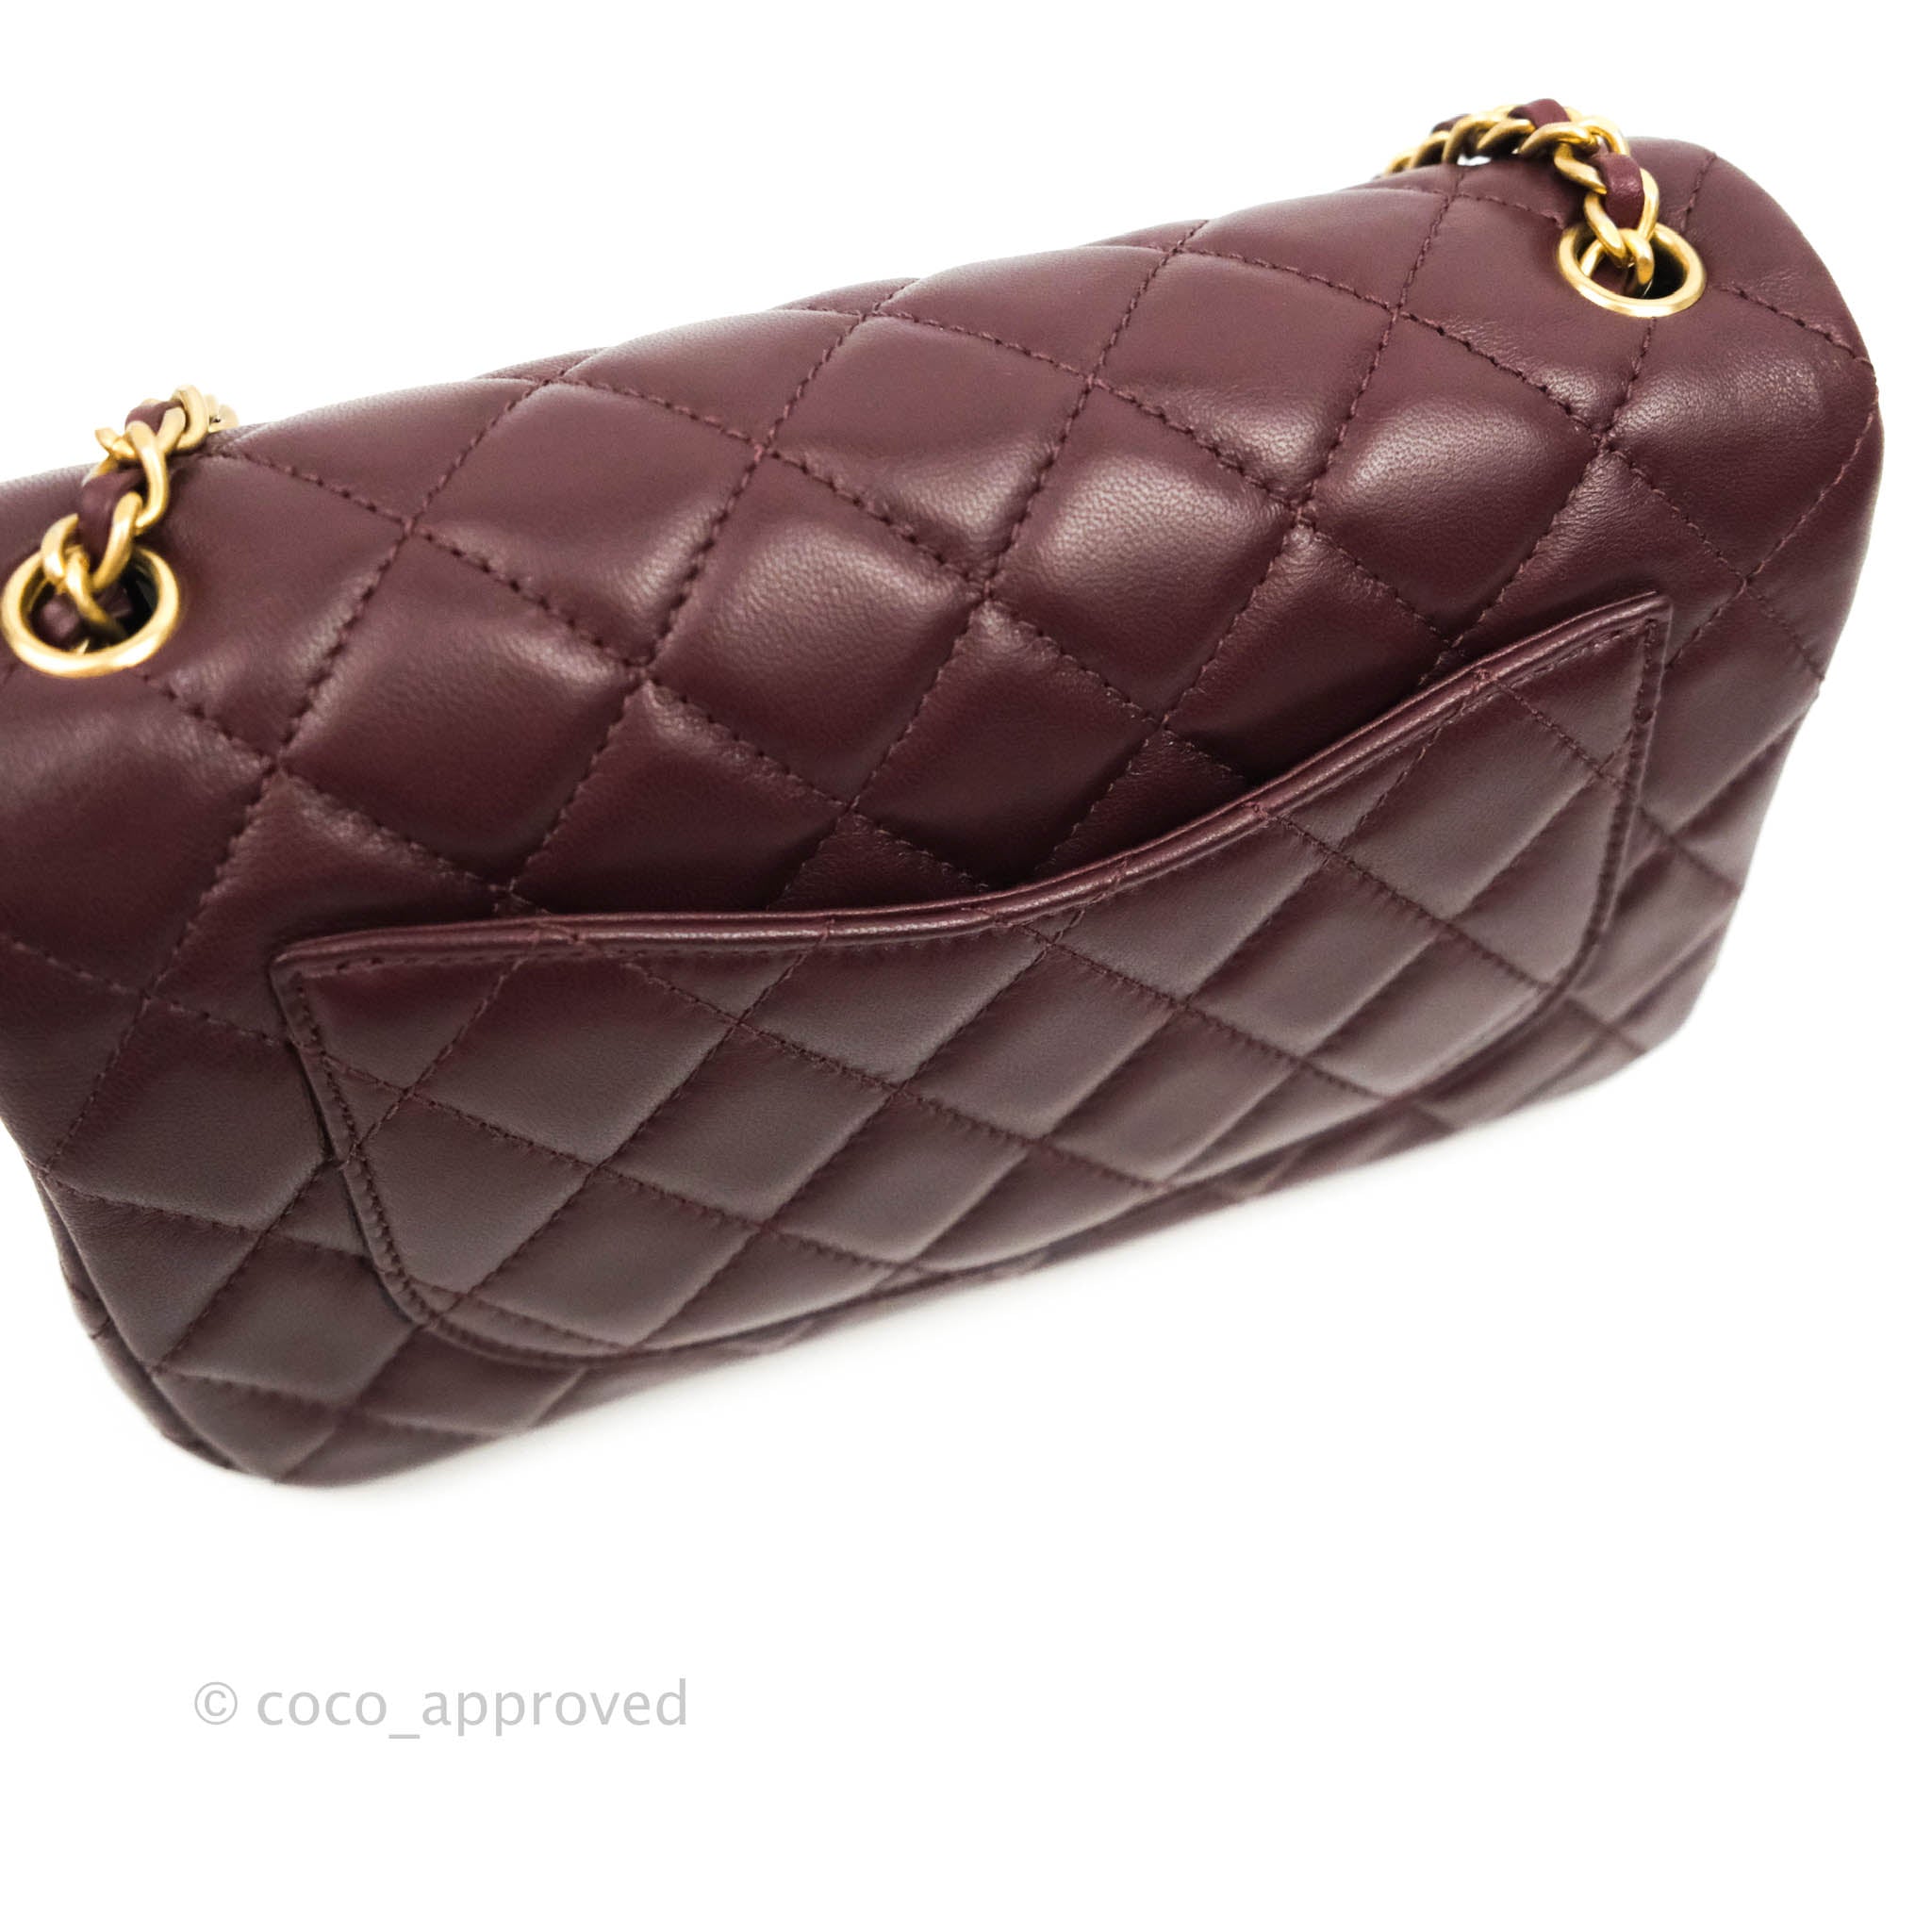 Chanel Mini Rectangular Pearl Crush Quilted Maroon Red Lambskin